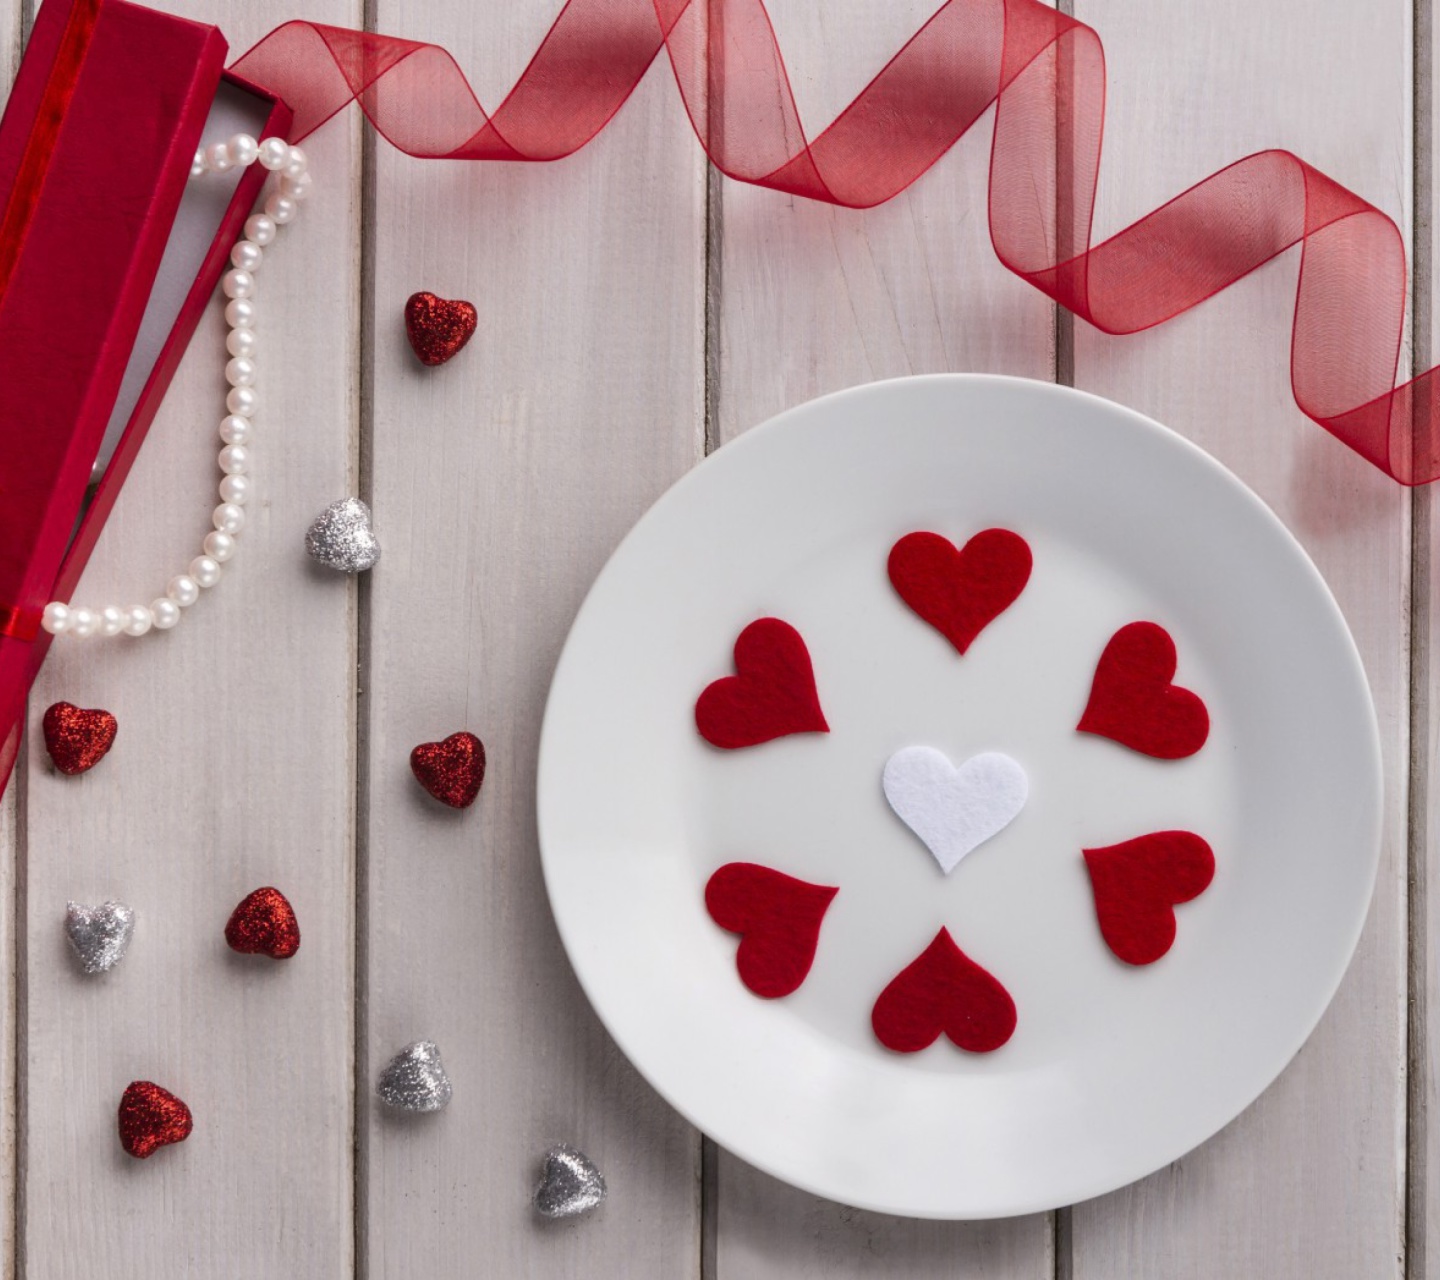 Romantic Valentines Day Table Settings wallpaper 1440x1280